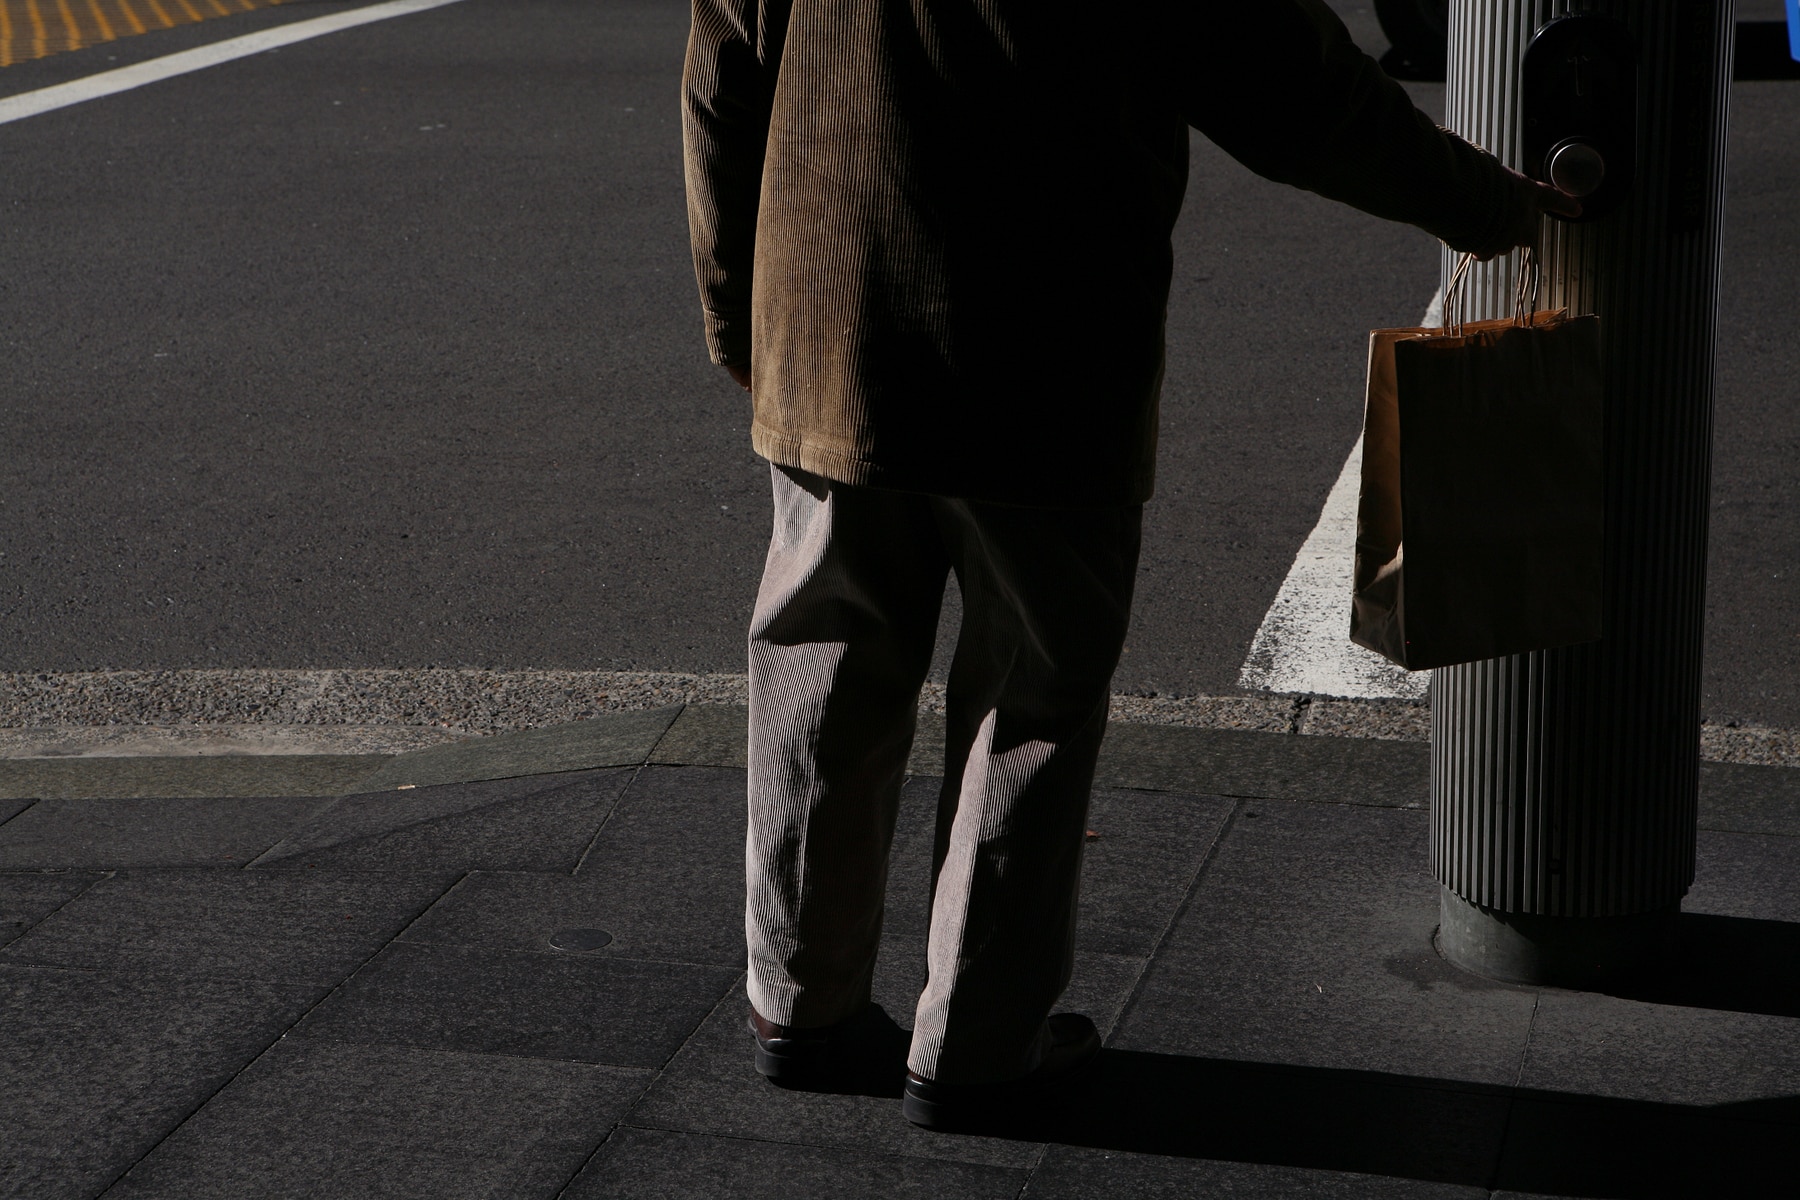 An elderly man waits at traffic lights on George Street in Sydney, Wednesday, May 18, 2011. (AAP Image/Angela Brkic) NO ARCHIVING